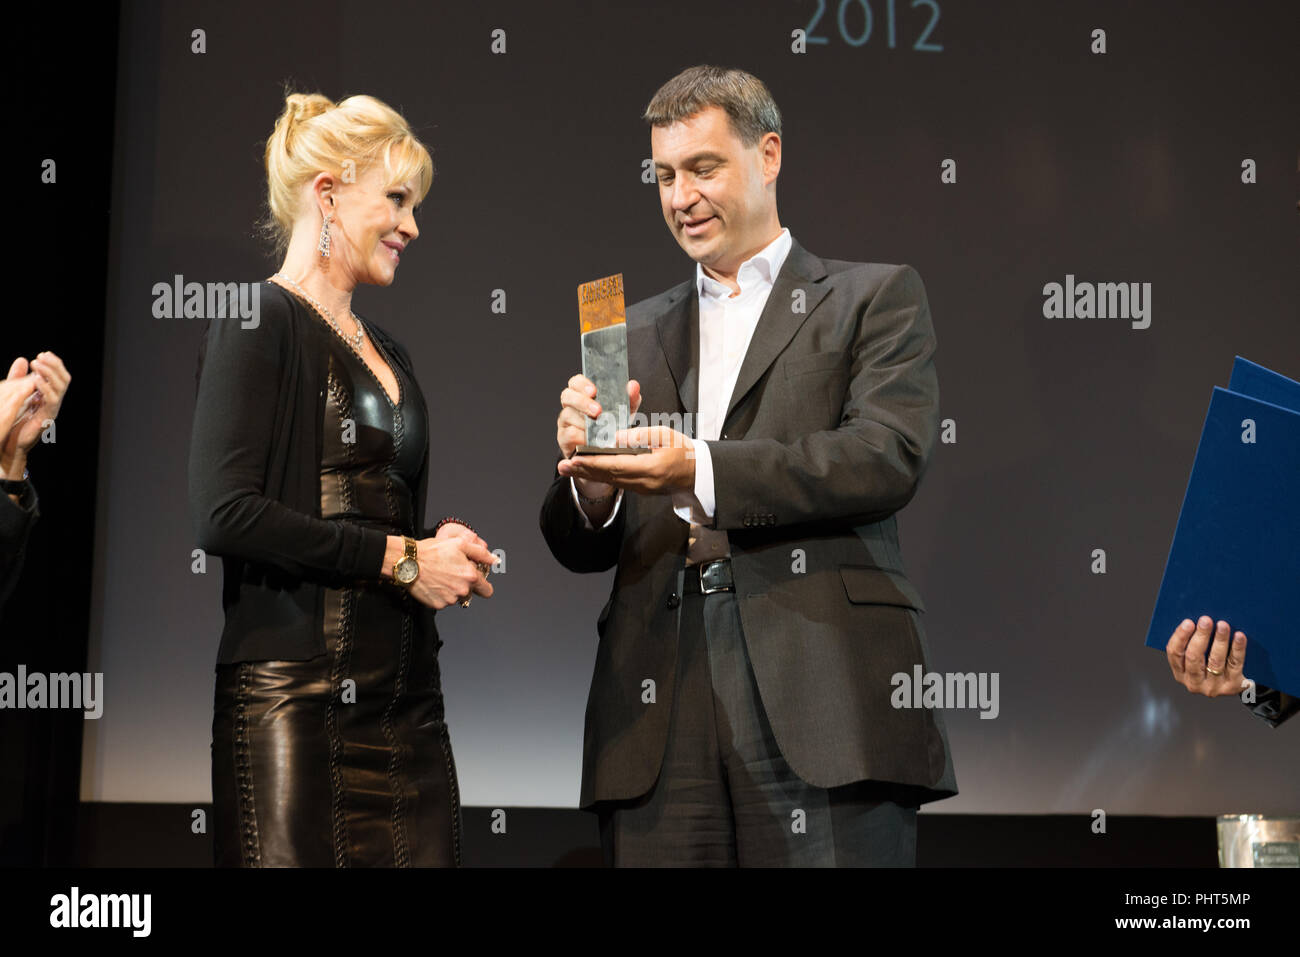 Actress Melanie Griffith receives the CieMerit Award from Markus Söder at Filmfest München 2012 Stock Photo